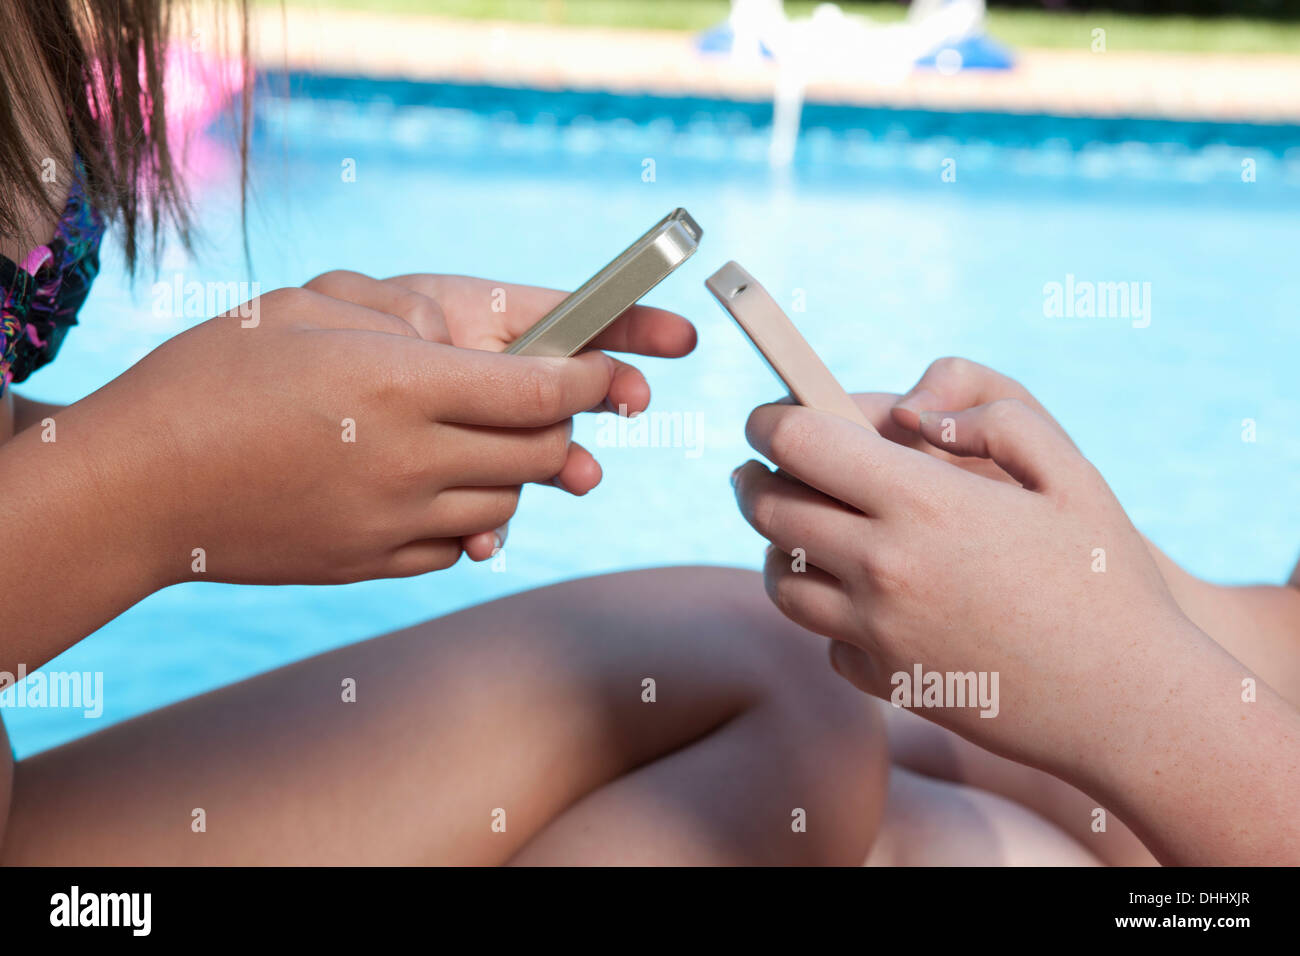 Friends texting on mobile phone Stock Photo